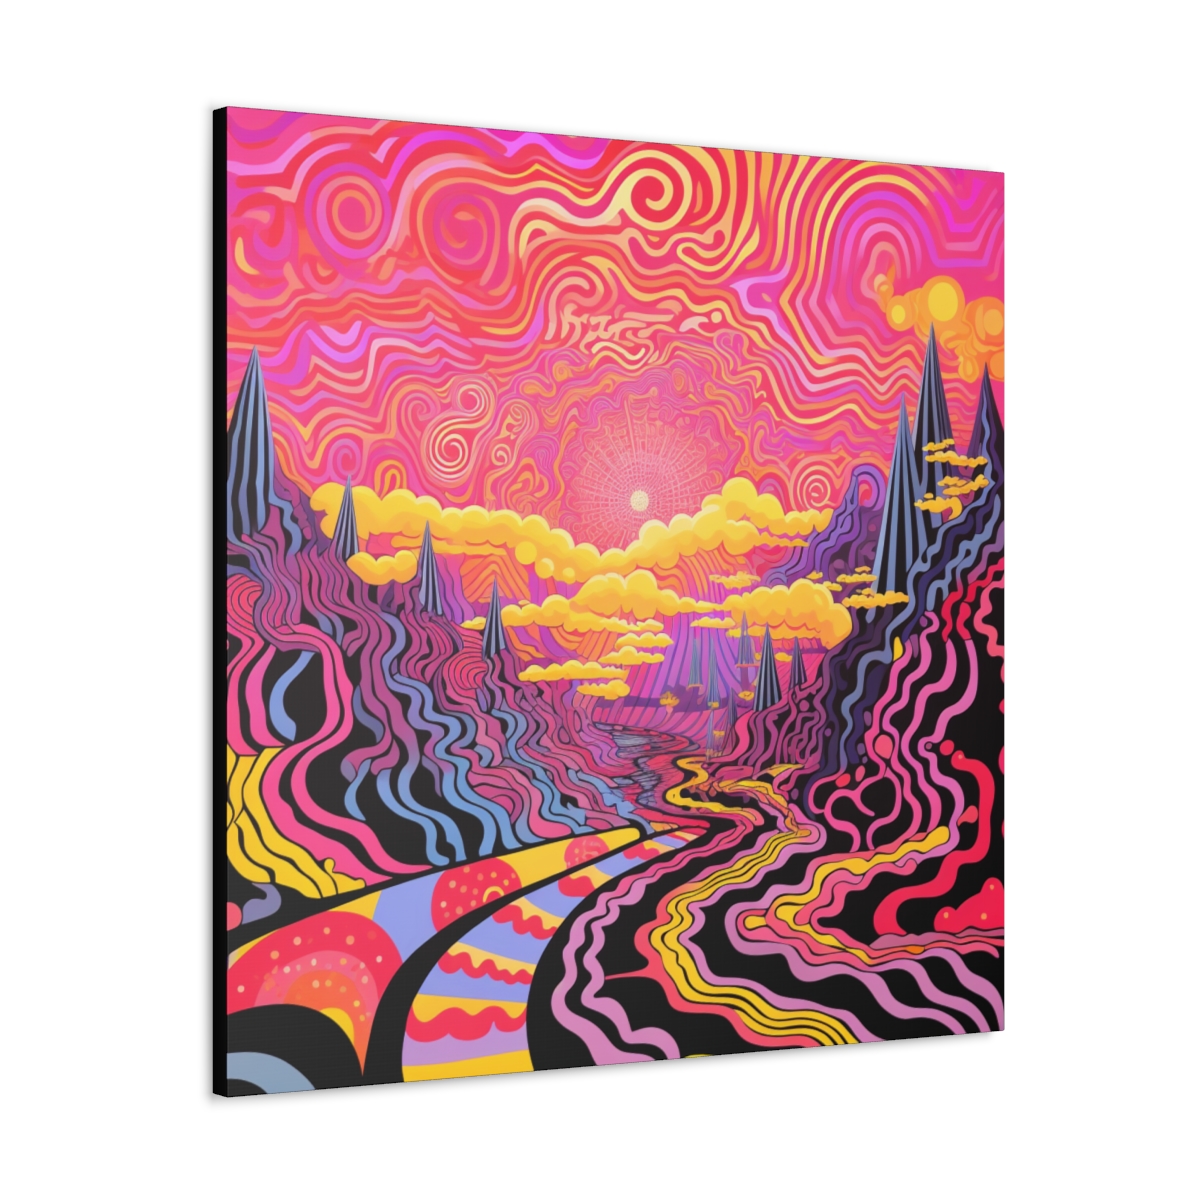 Hippie Trippy Wall Art: Whispers Of Ectasy